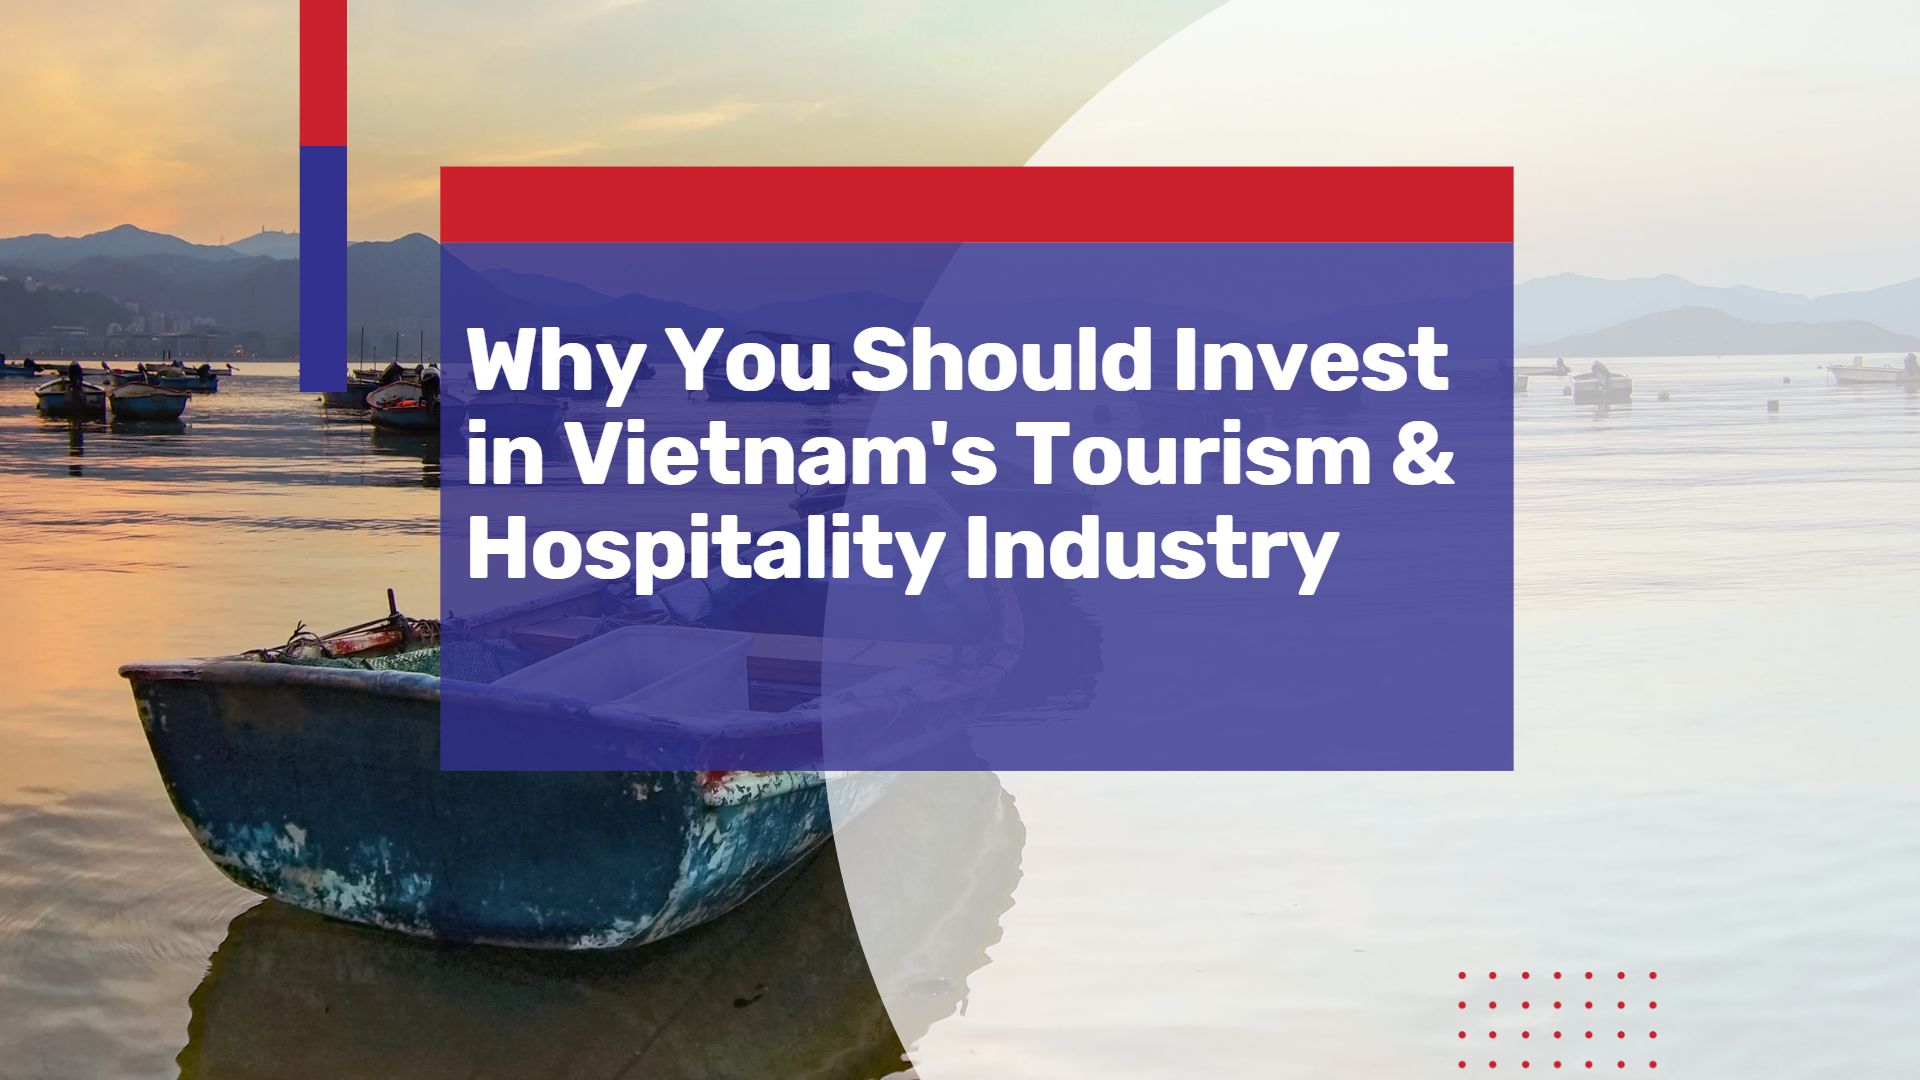 Why You Should Invest in Vietnam’s Tourism and Hospitality Industry